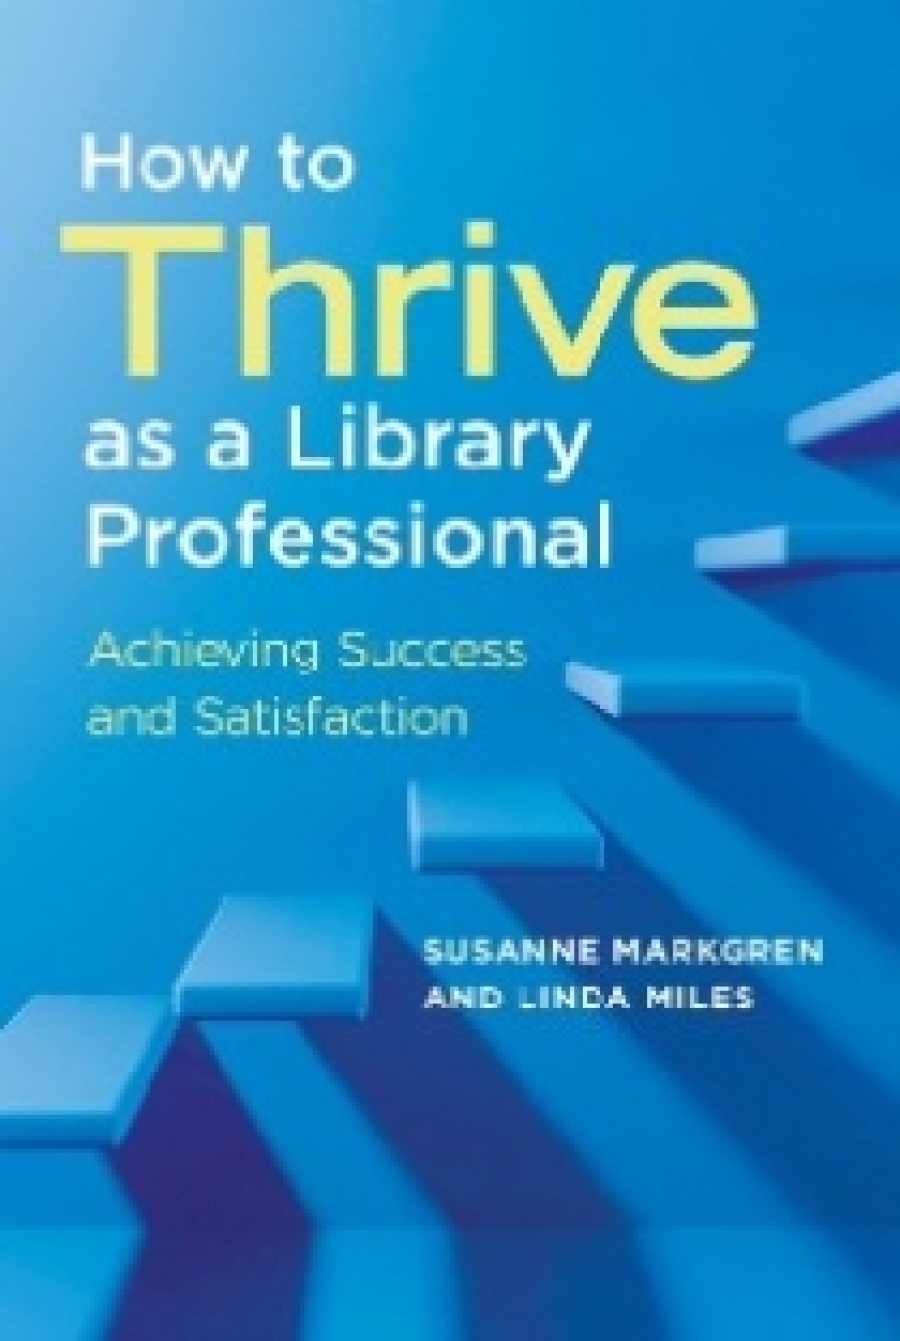 Susanne Markgren and Linda Miles How to Thrive as a Library Professional: Achieving Success and Satisfaction 